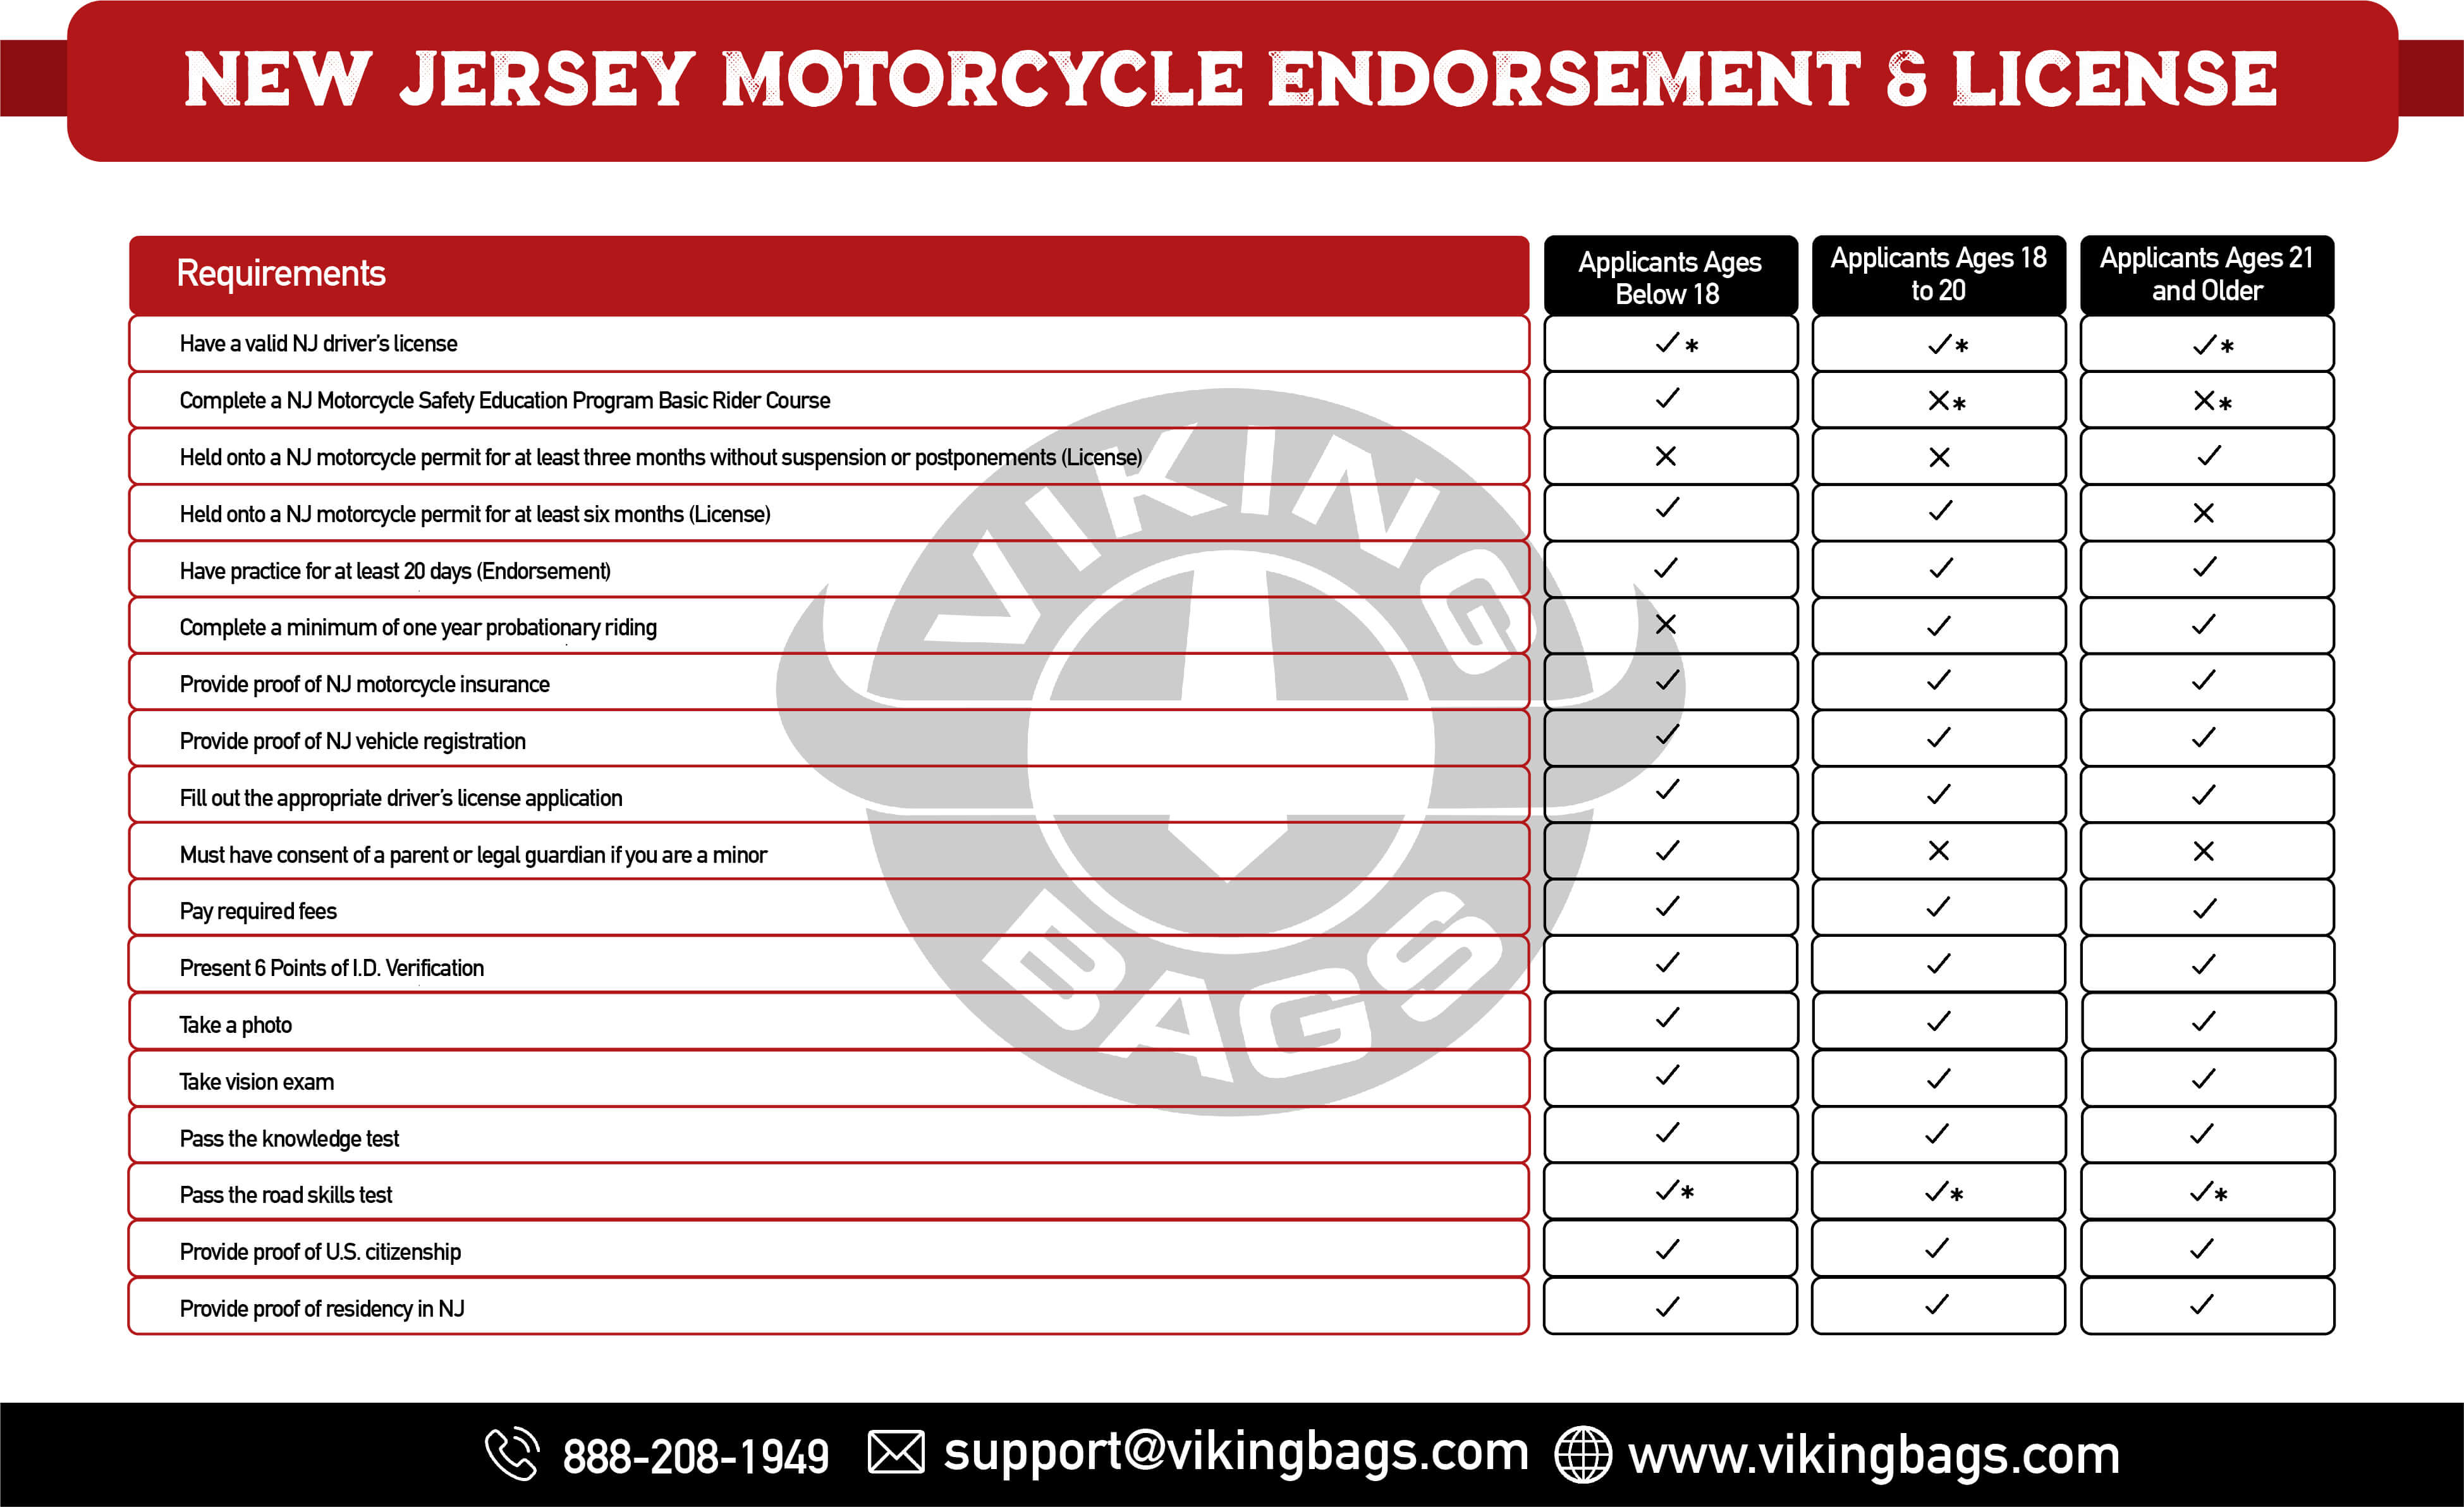 New Jersey Motorcycle Endorsement & License